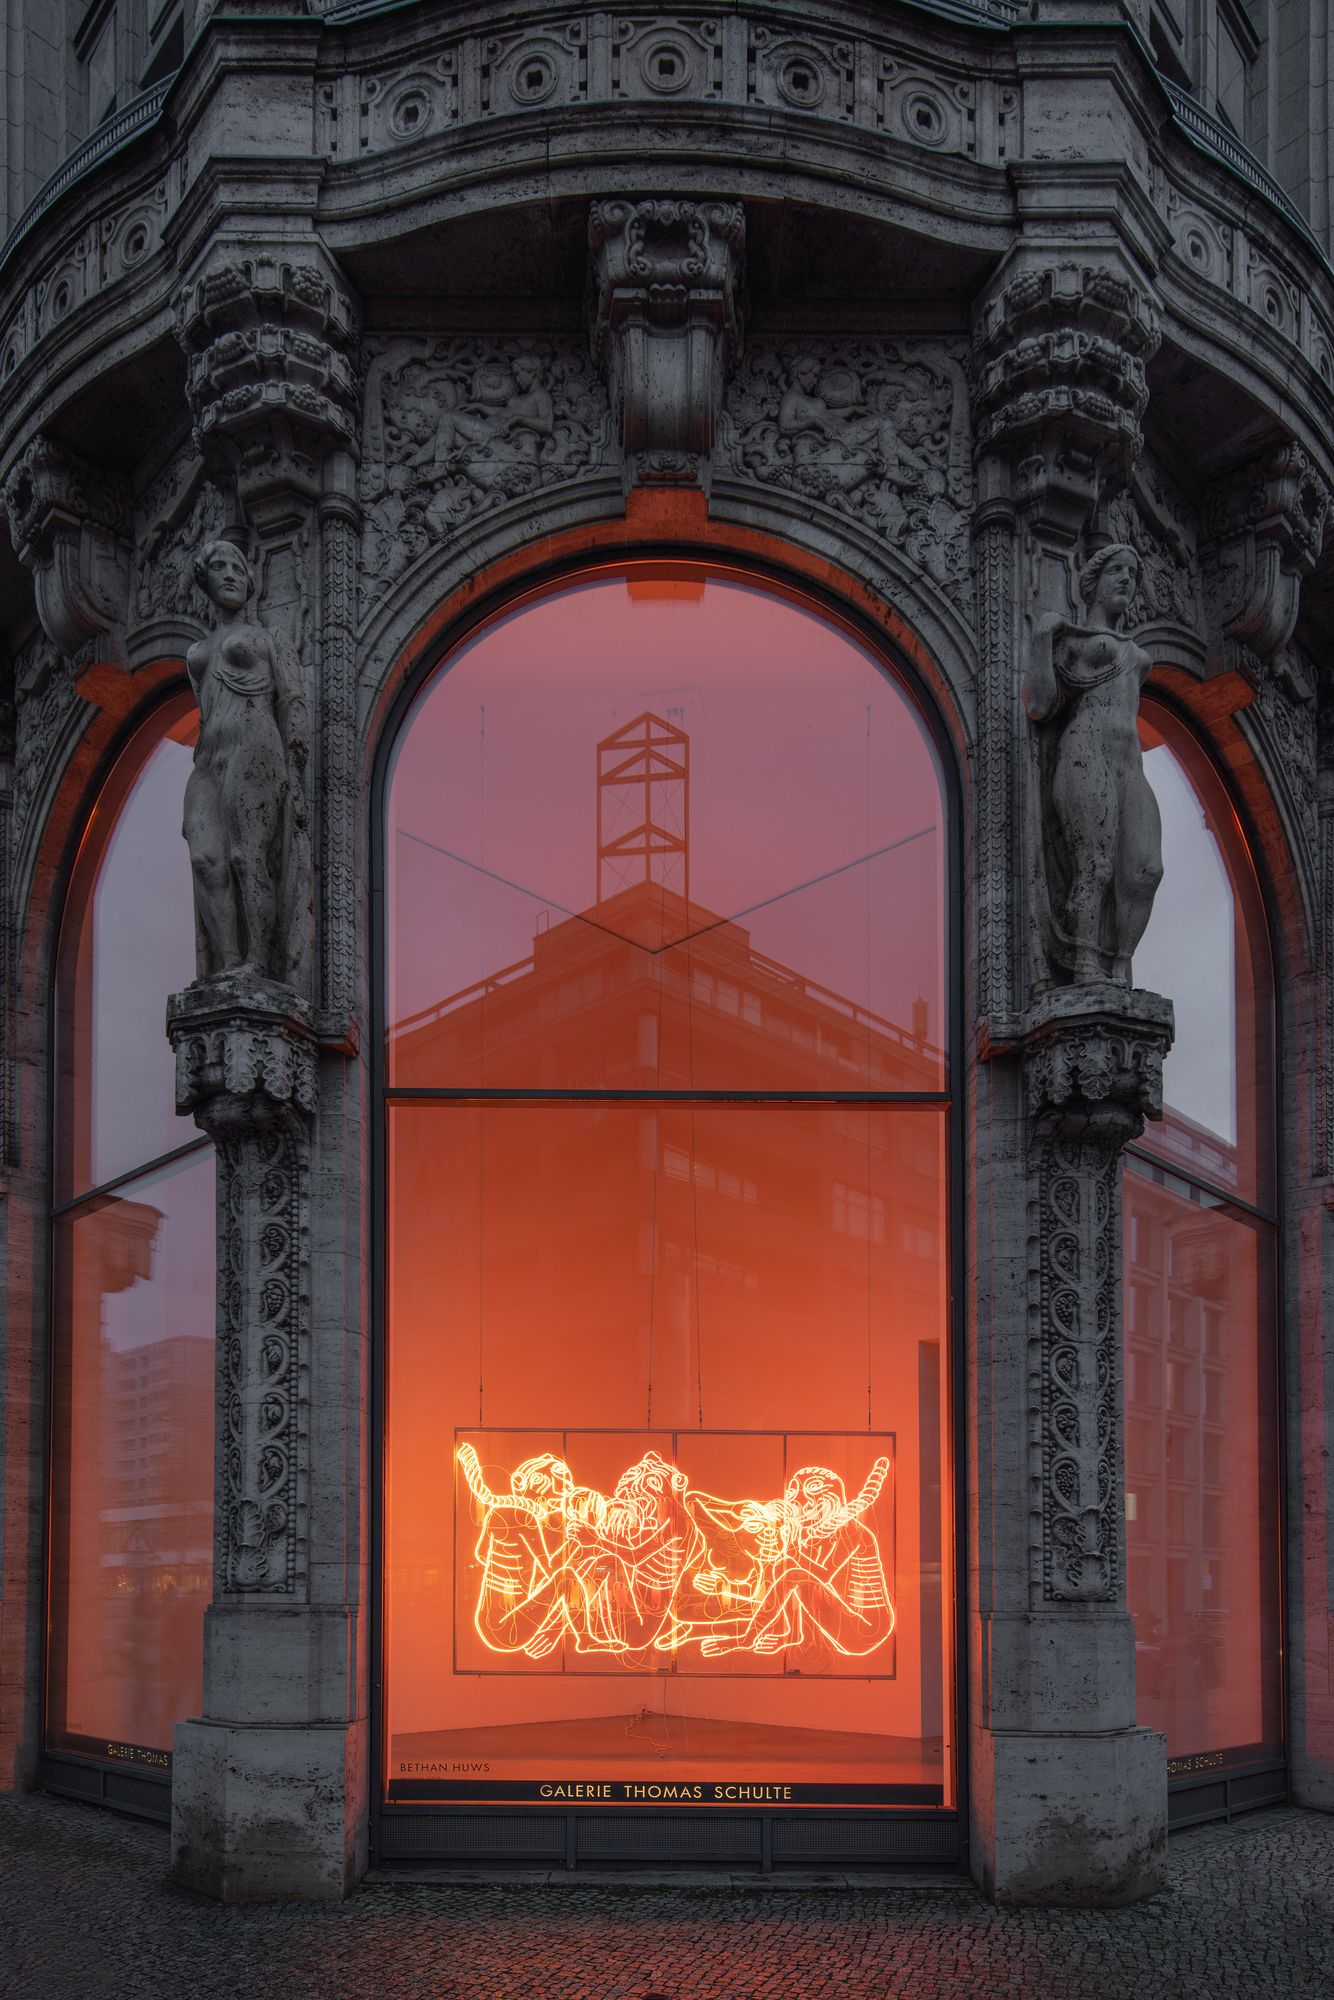 Bethan Huws, 'Medieval Neon' at Galerie Thomas Schulte, Berlin, Germany on  10–28 Dec 2022